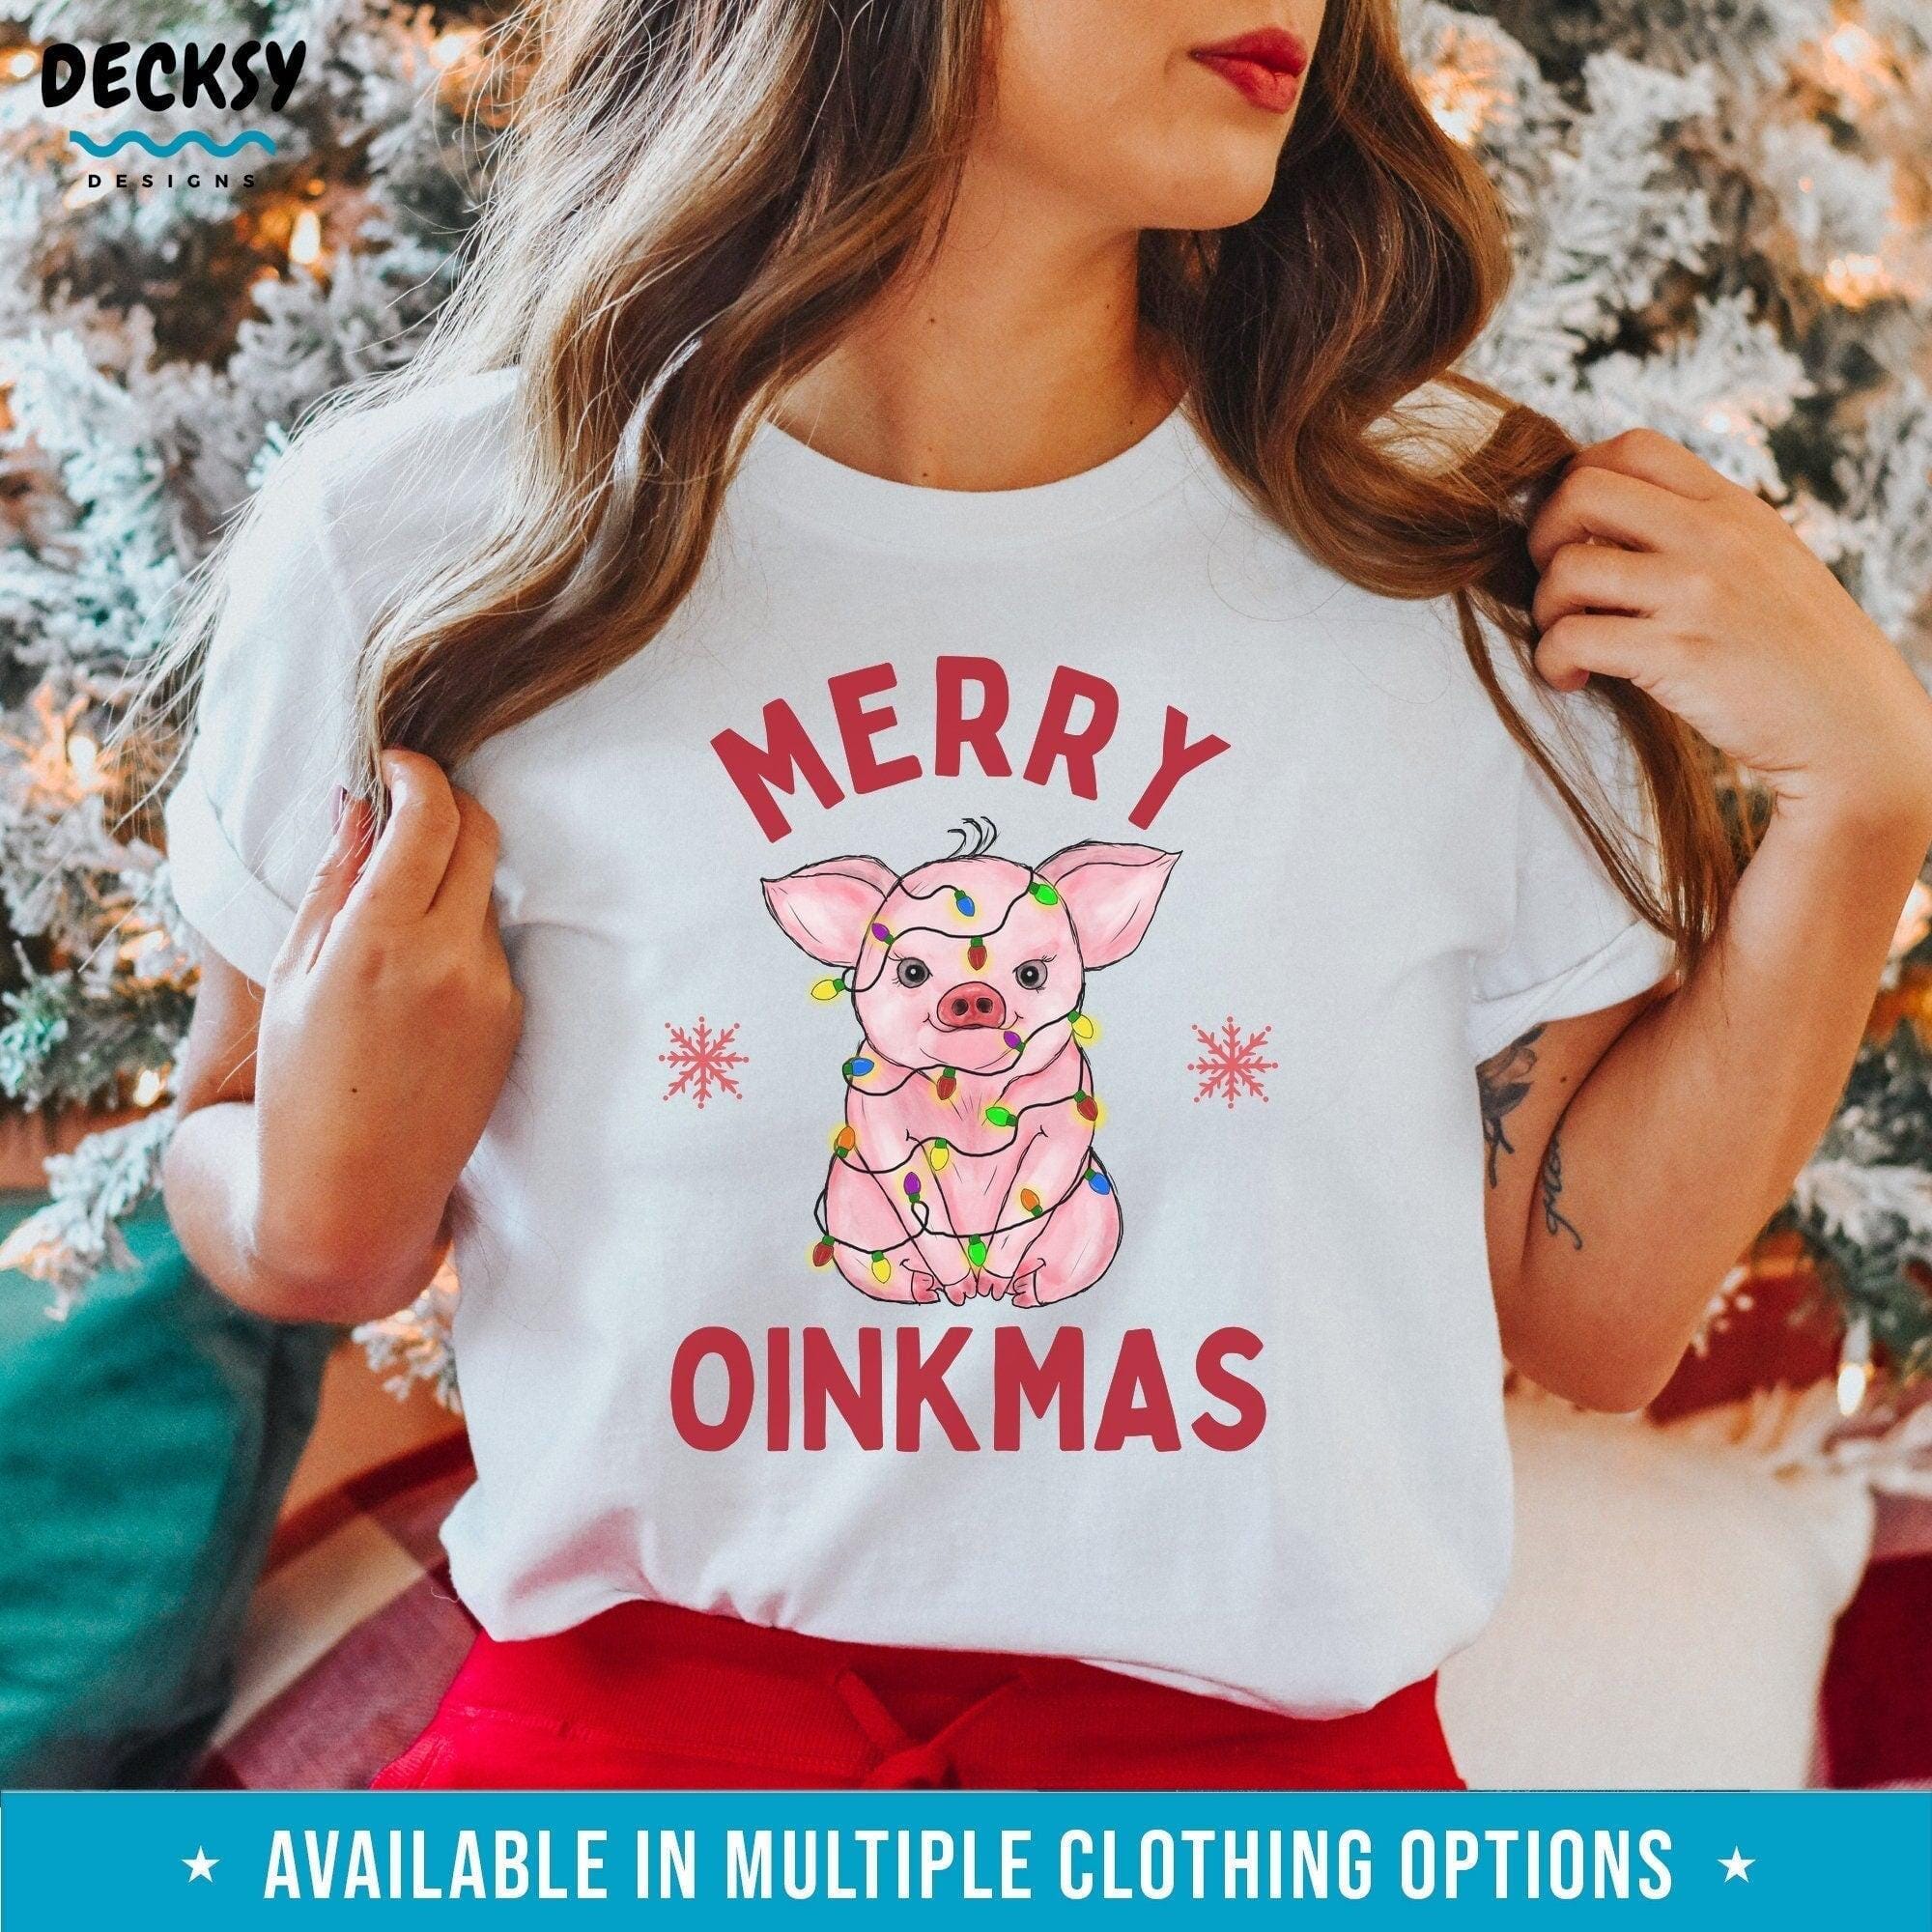 Pig Christmas Shirt, Holiday Gift-Clothing:Gender-Neutral Adult Clothing:Tops & Tees:T-shirts:Graphic Tees-DecksyDesigns